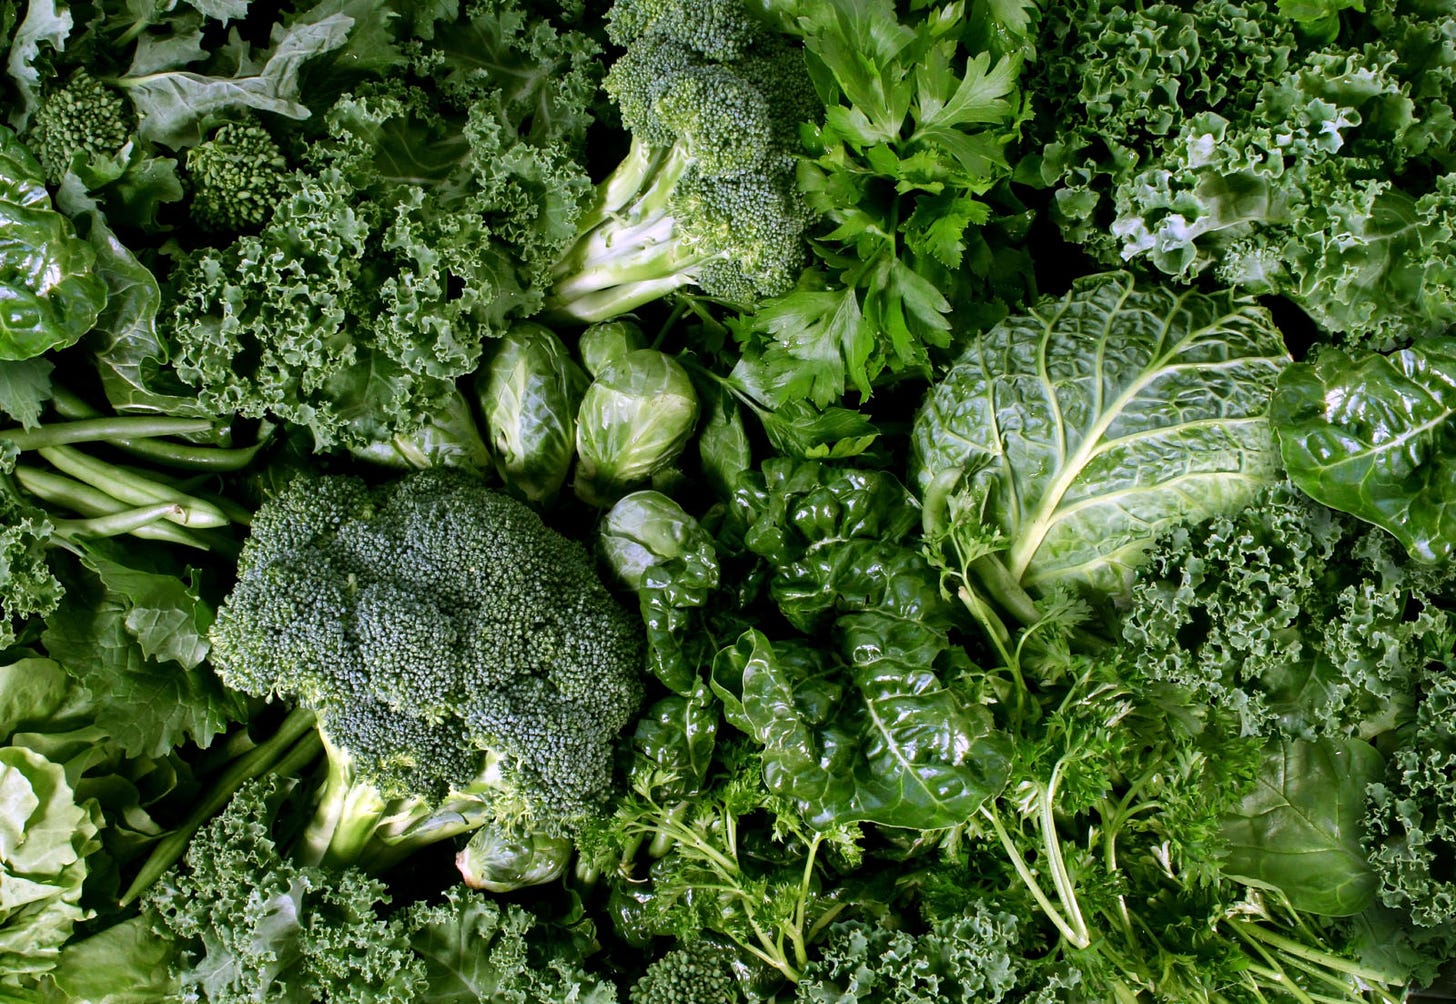 A-Z List Of 59 Leafy Green Vegetables | Horticulture.co.uk